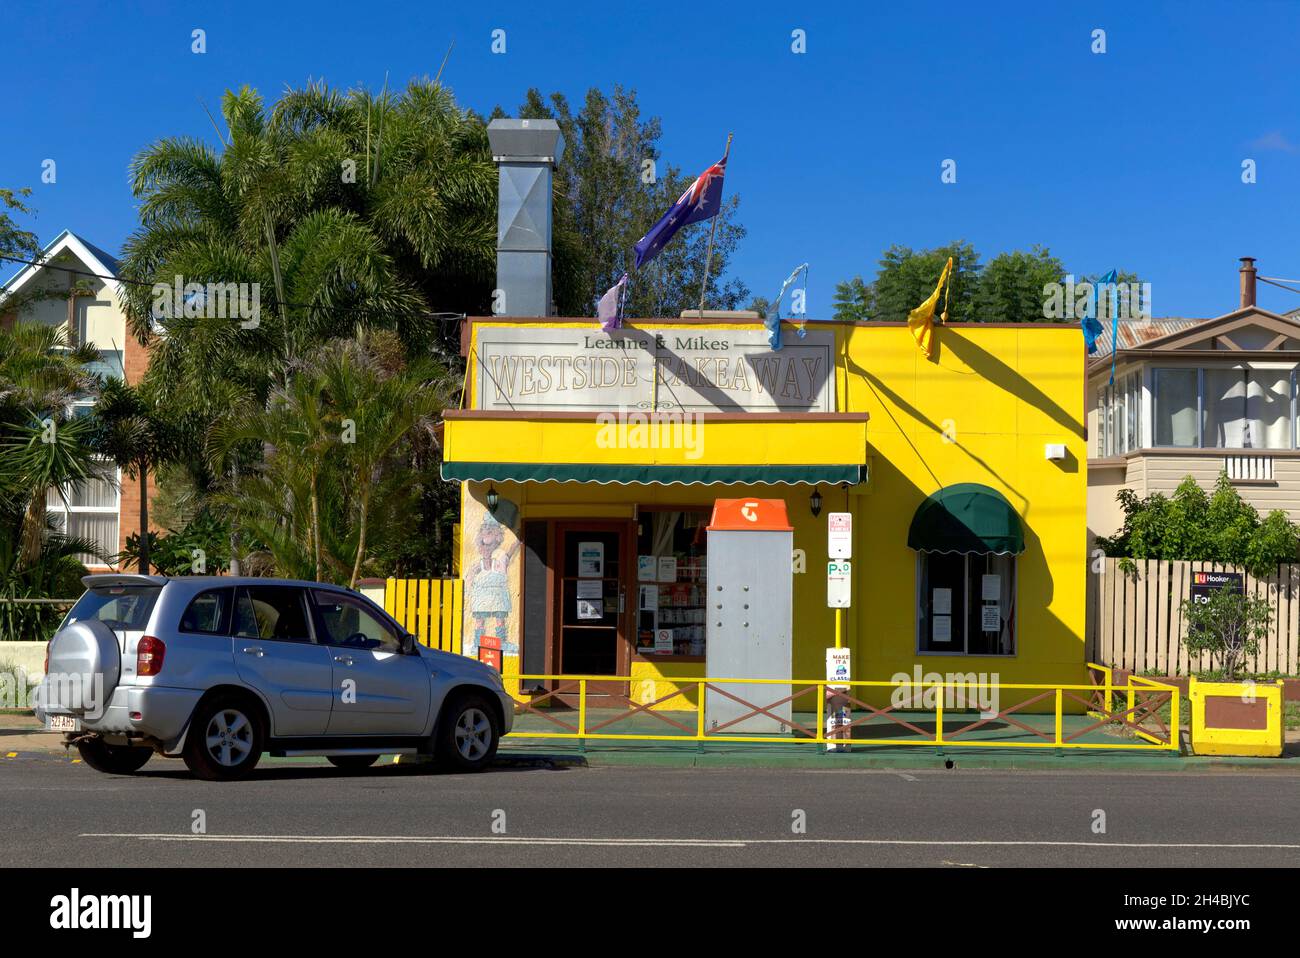 Leanne and Mikes takeaway shop forms a colourful part of the streetscape of Meson Street Gayndah Queensland Australia Stock Photo